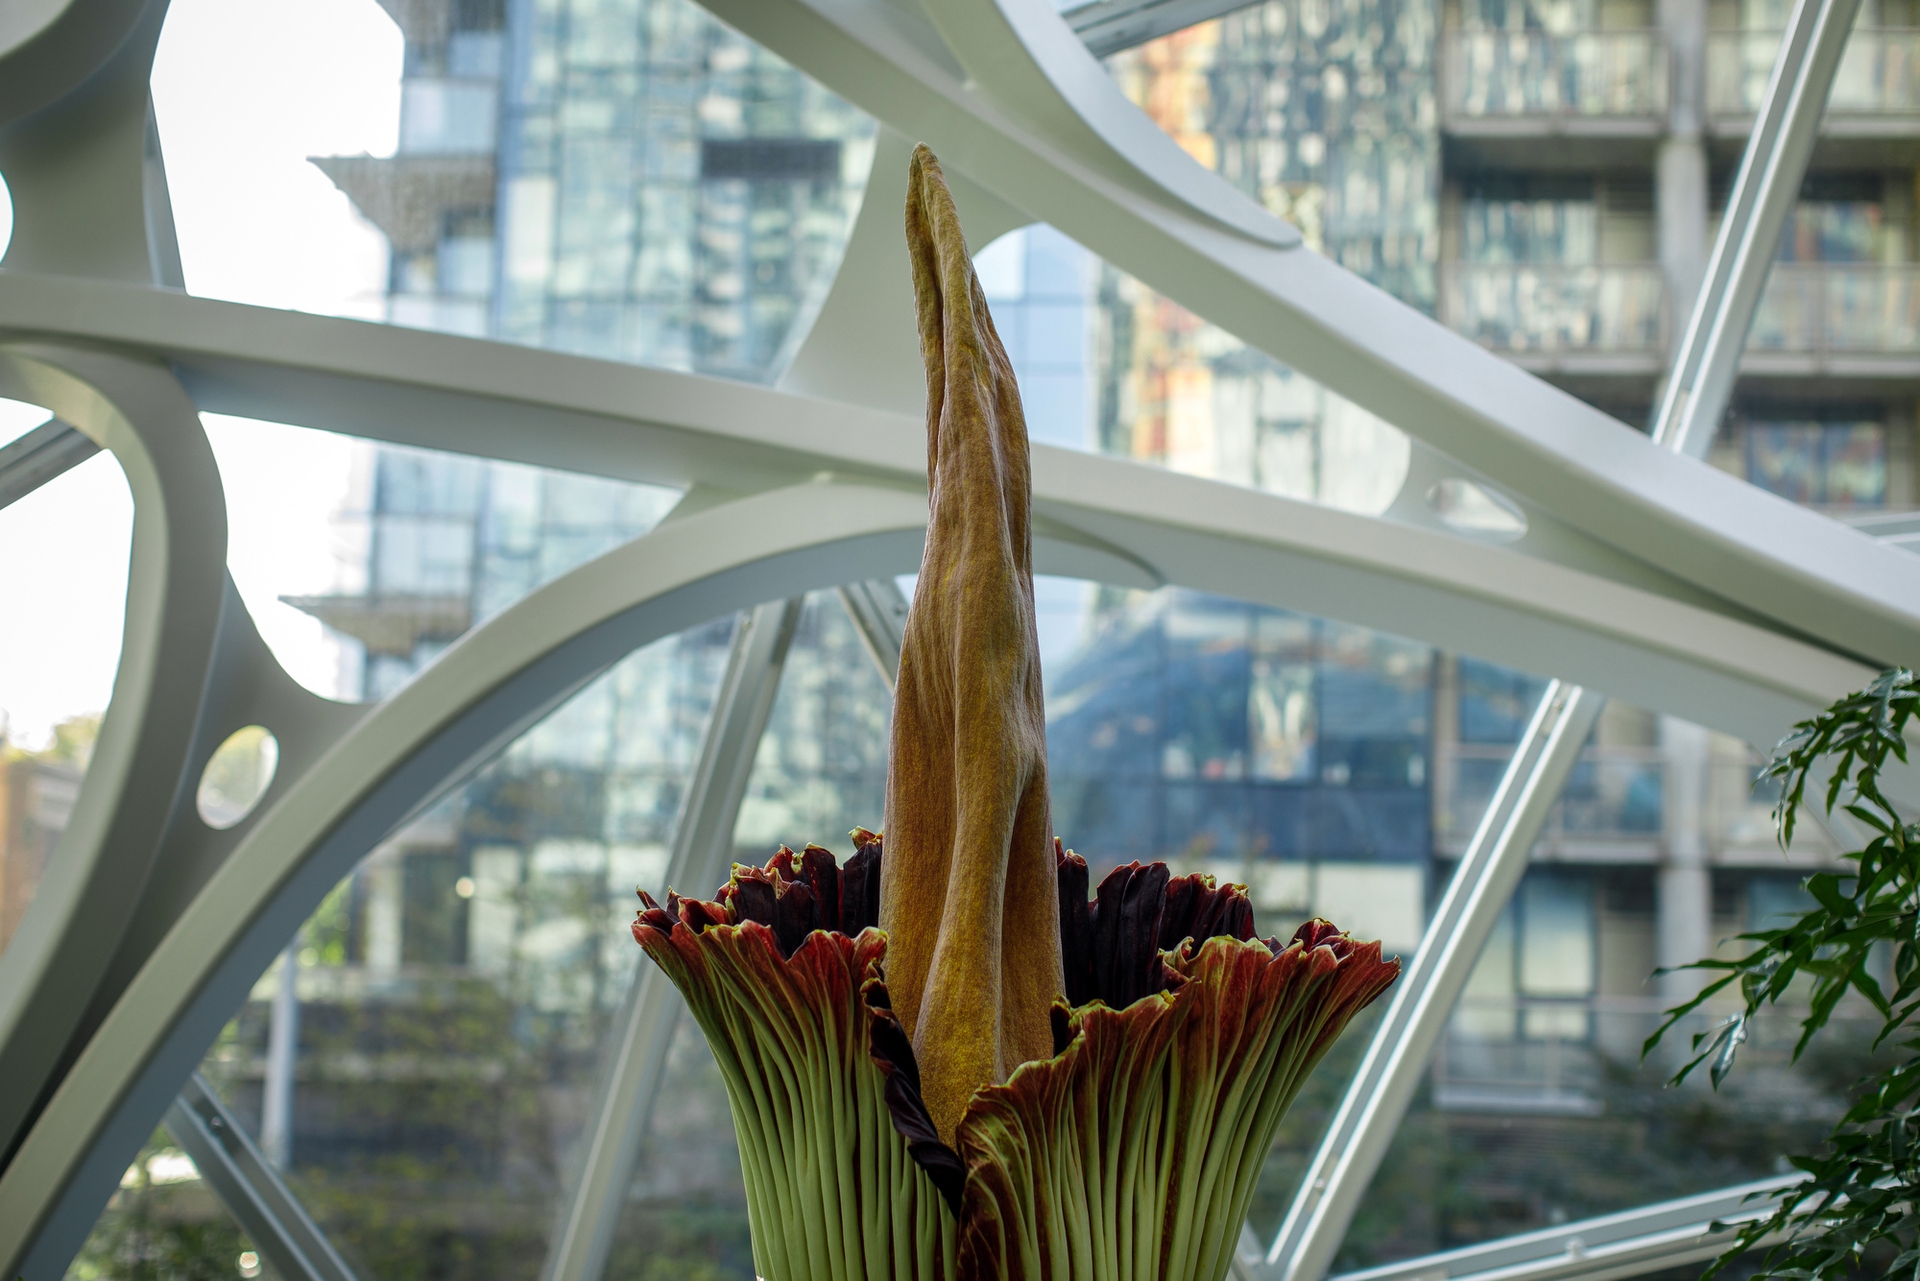 The corpse flower as it begins to open, the leaves are beginning to change from green to red. In the background, apartment buildings are seen. 